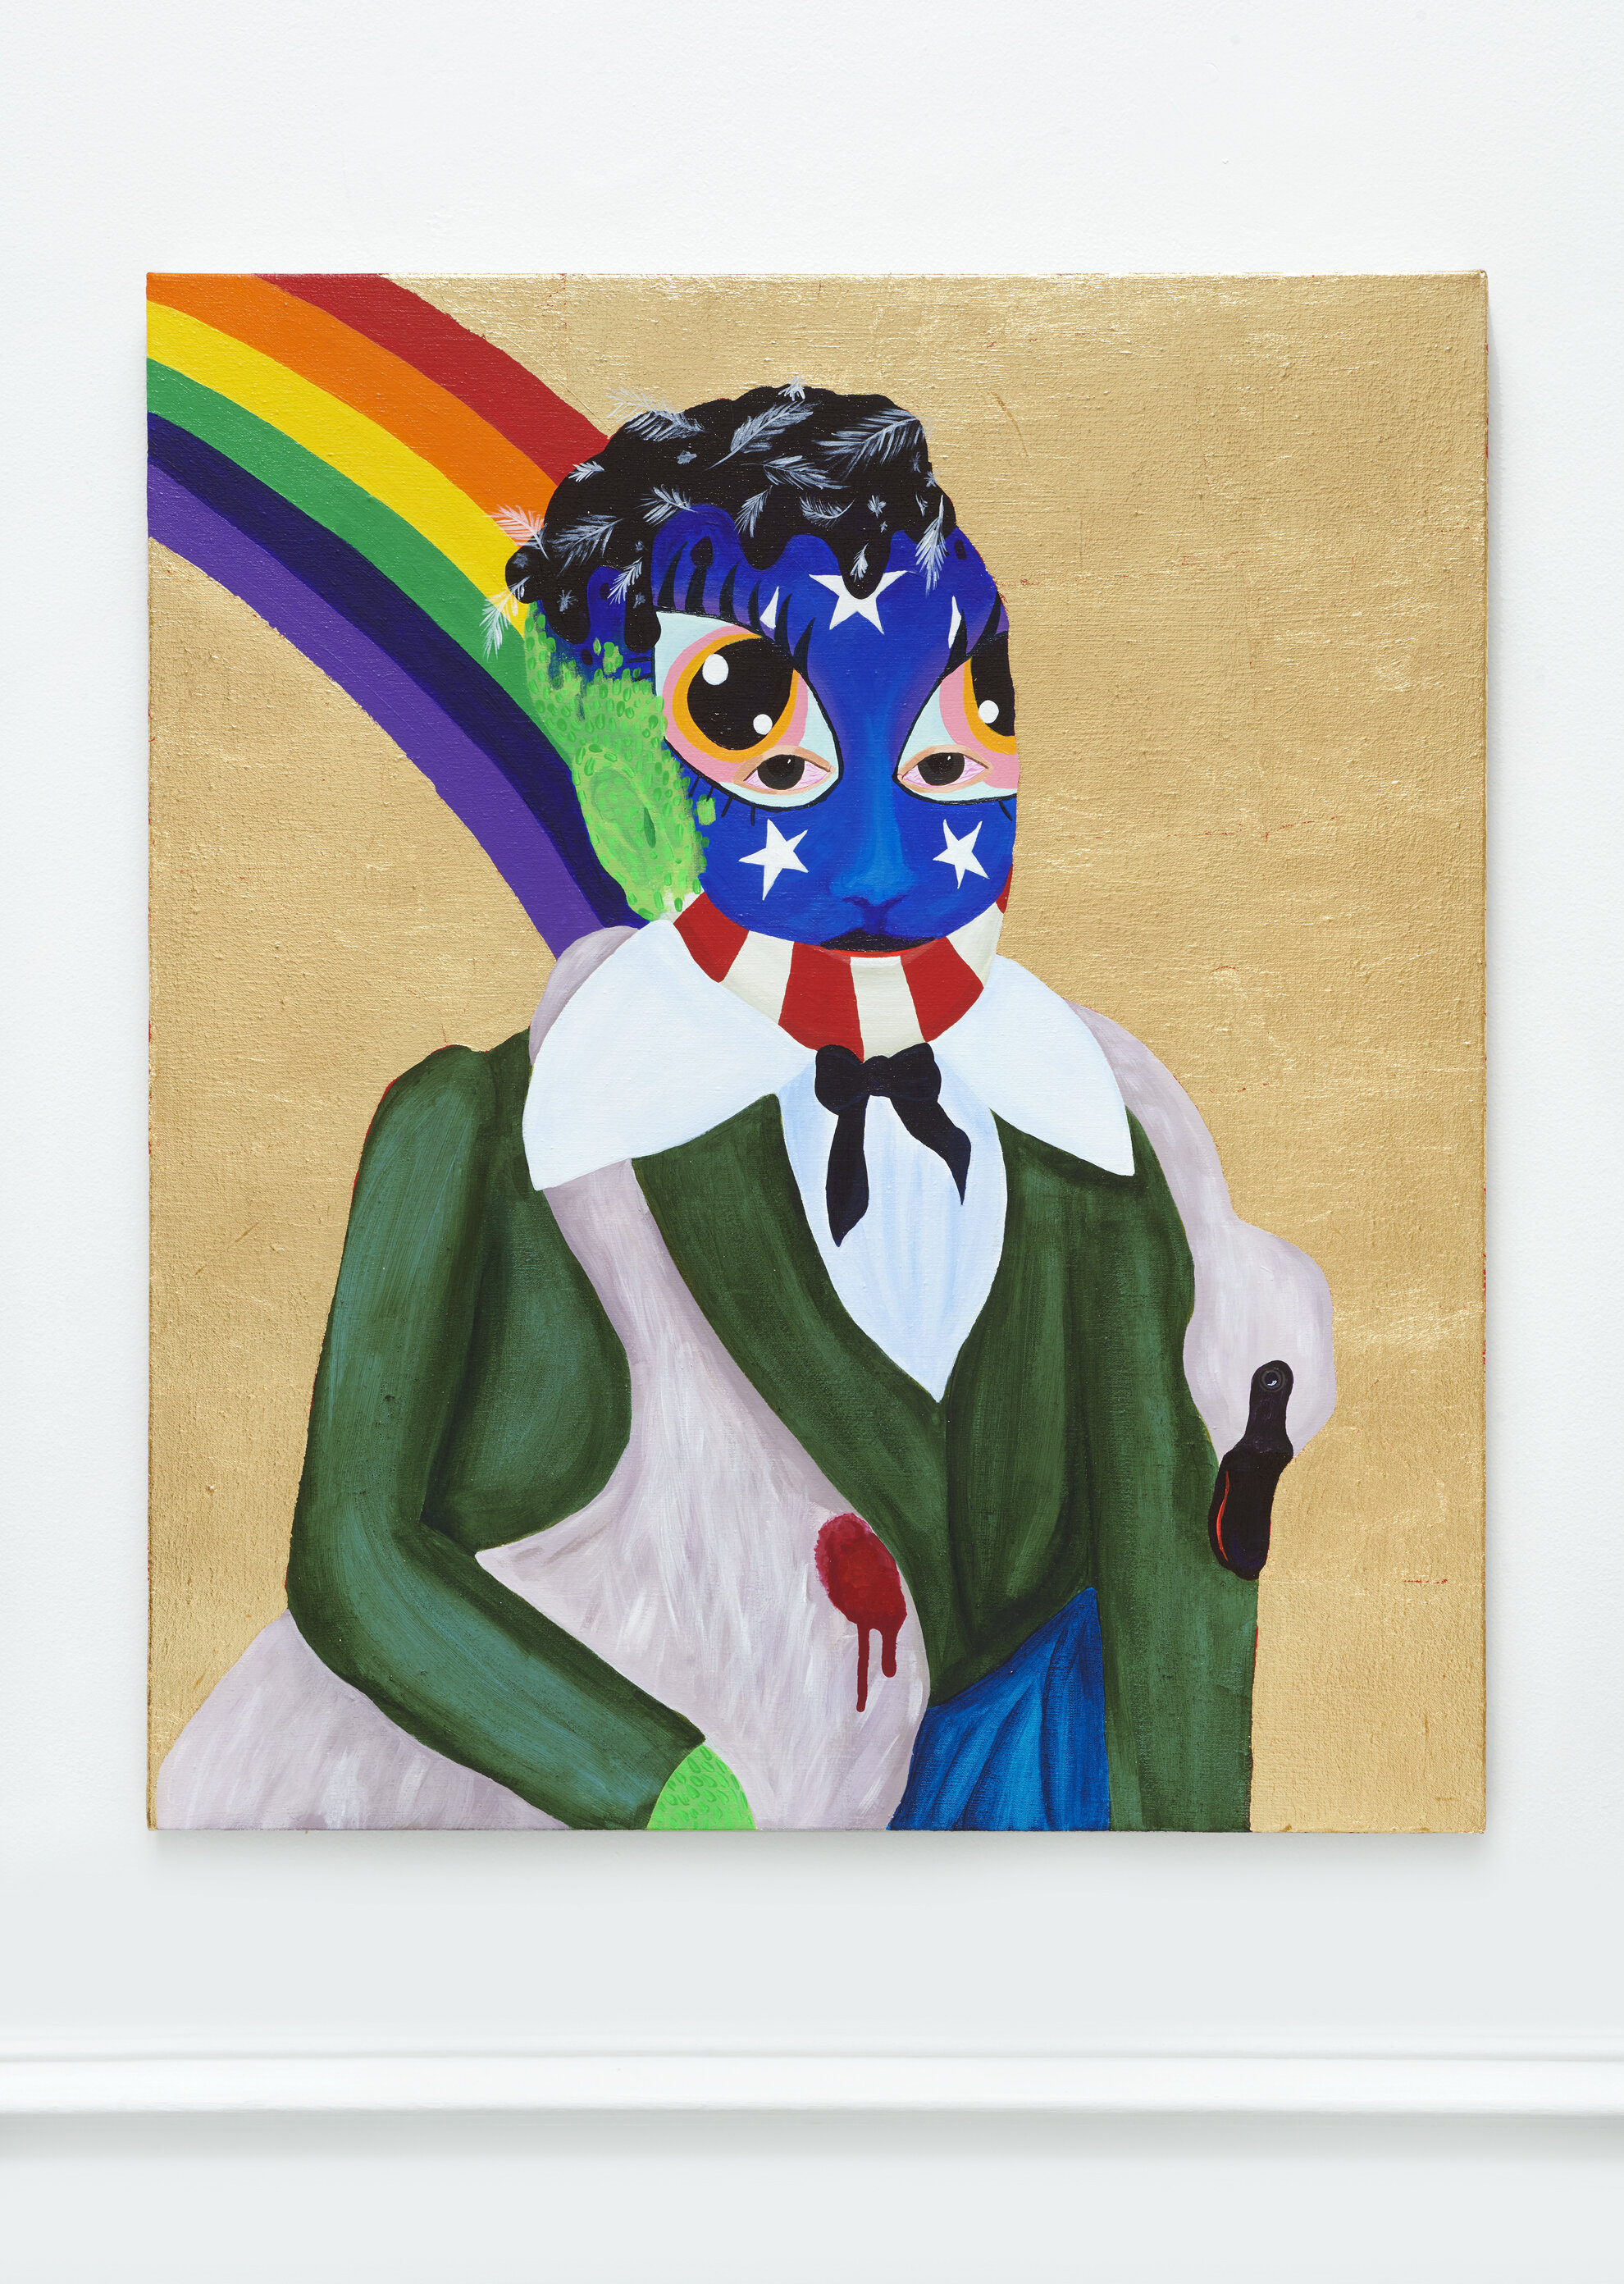   Parsifal (Tar and Feather Betsy Ross Face Paint),  2019  24 x 28 x 1.5 inches (60.96 x 71.12 x 3.18 cm.)  Acrylic and gold leaf on linen  Private collection, Paris 